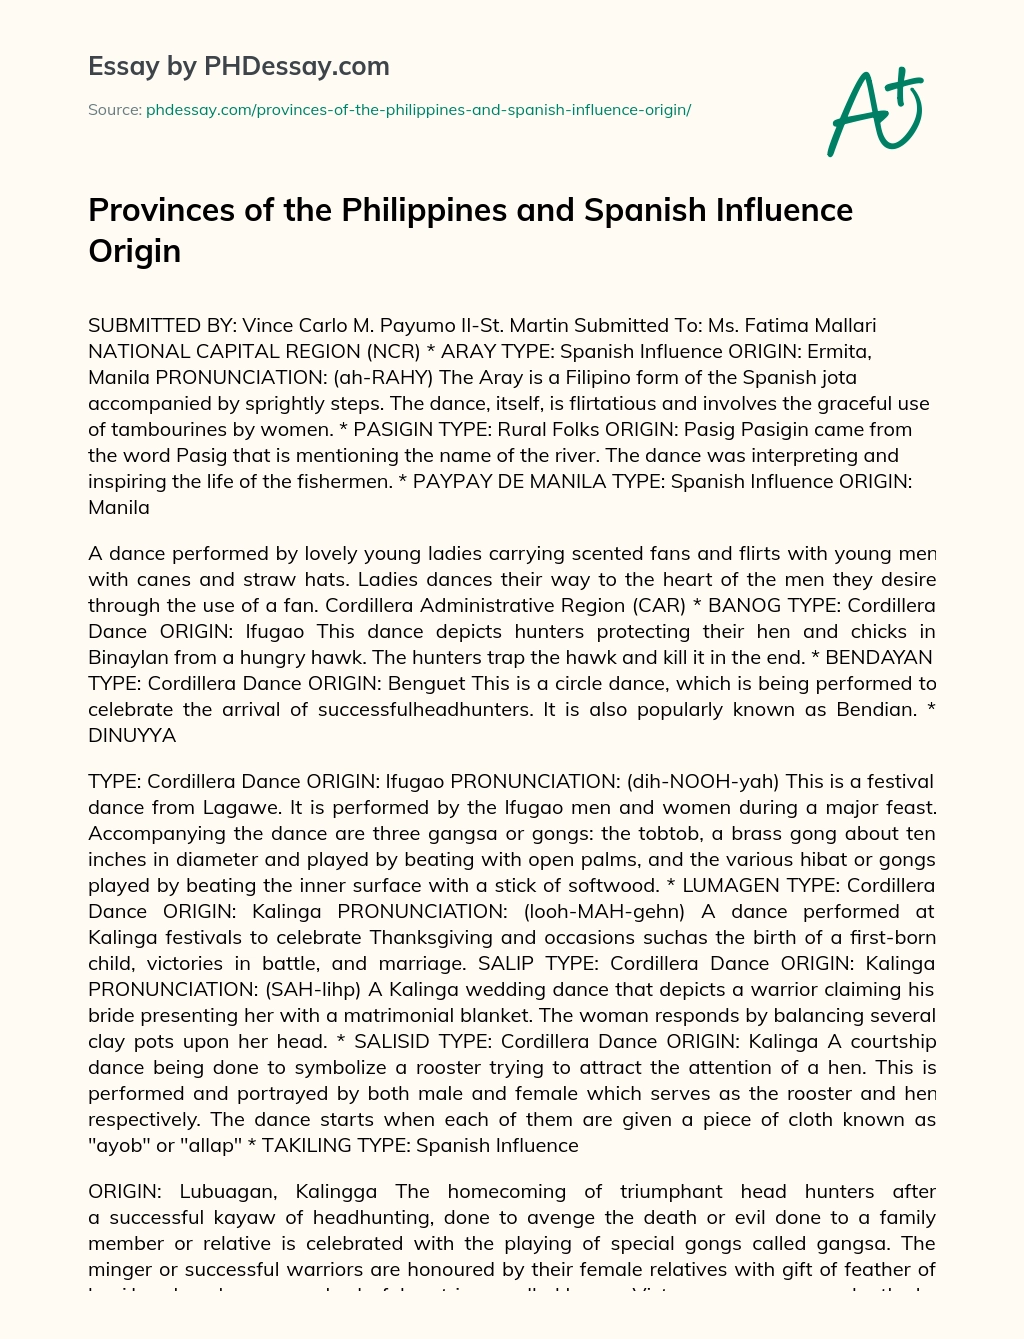 Provinces of the Philippines and Spanish Influence Origin essay